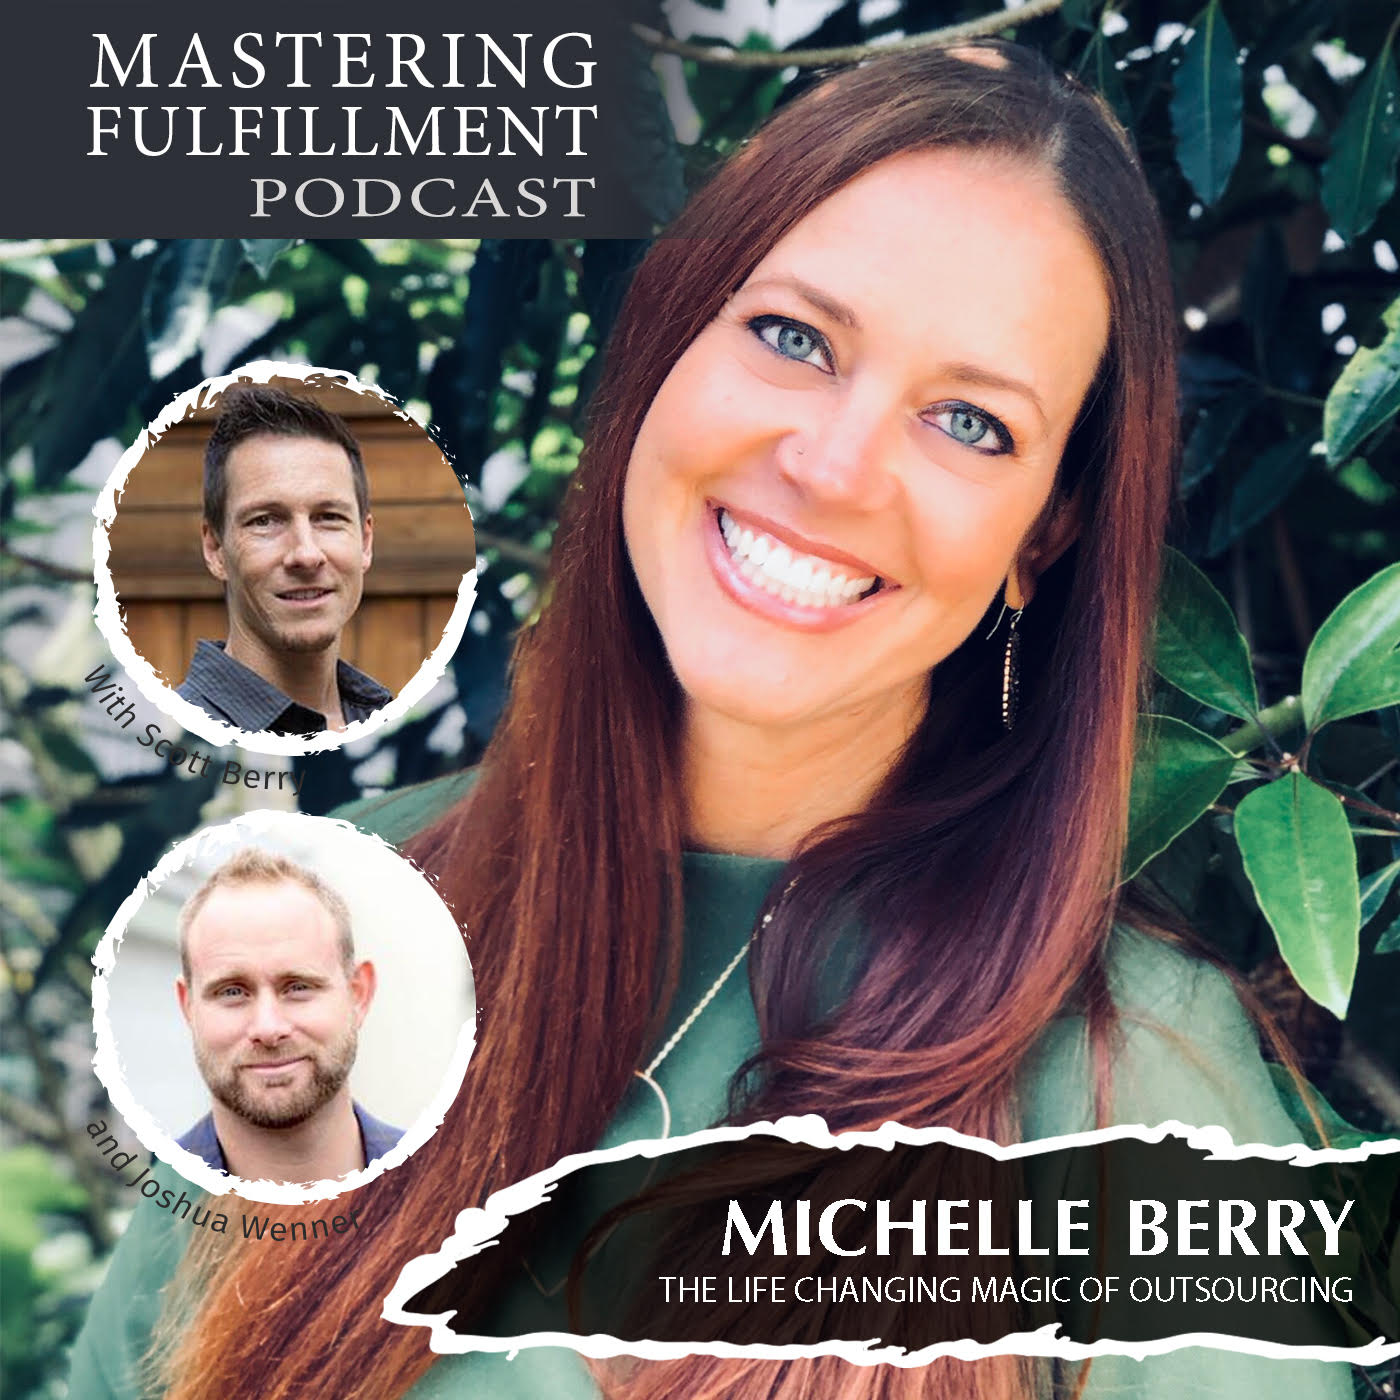 Outsourcing, personal assistant, Michelle Berry, Scott Berry, Joshua Wenner, Mastering Fulfillment podcast